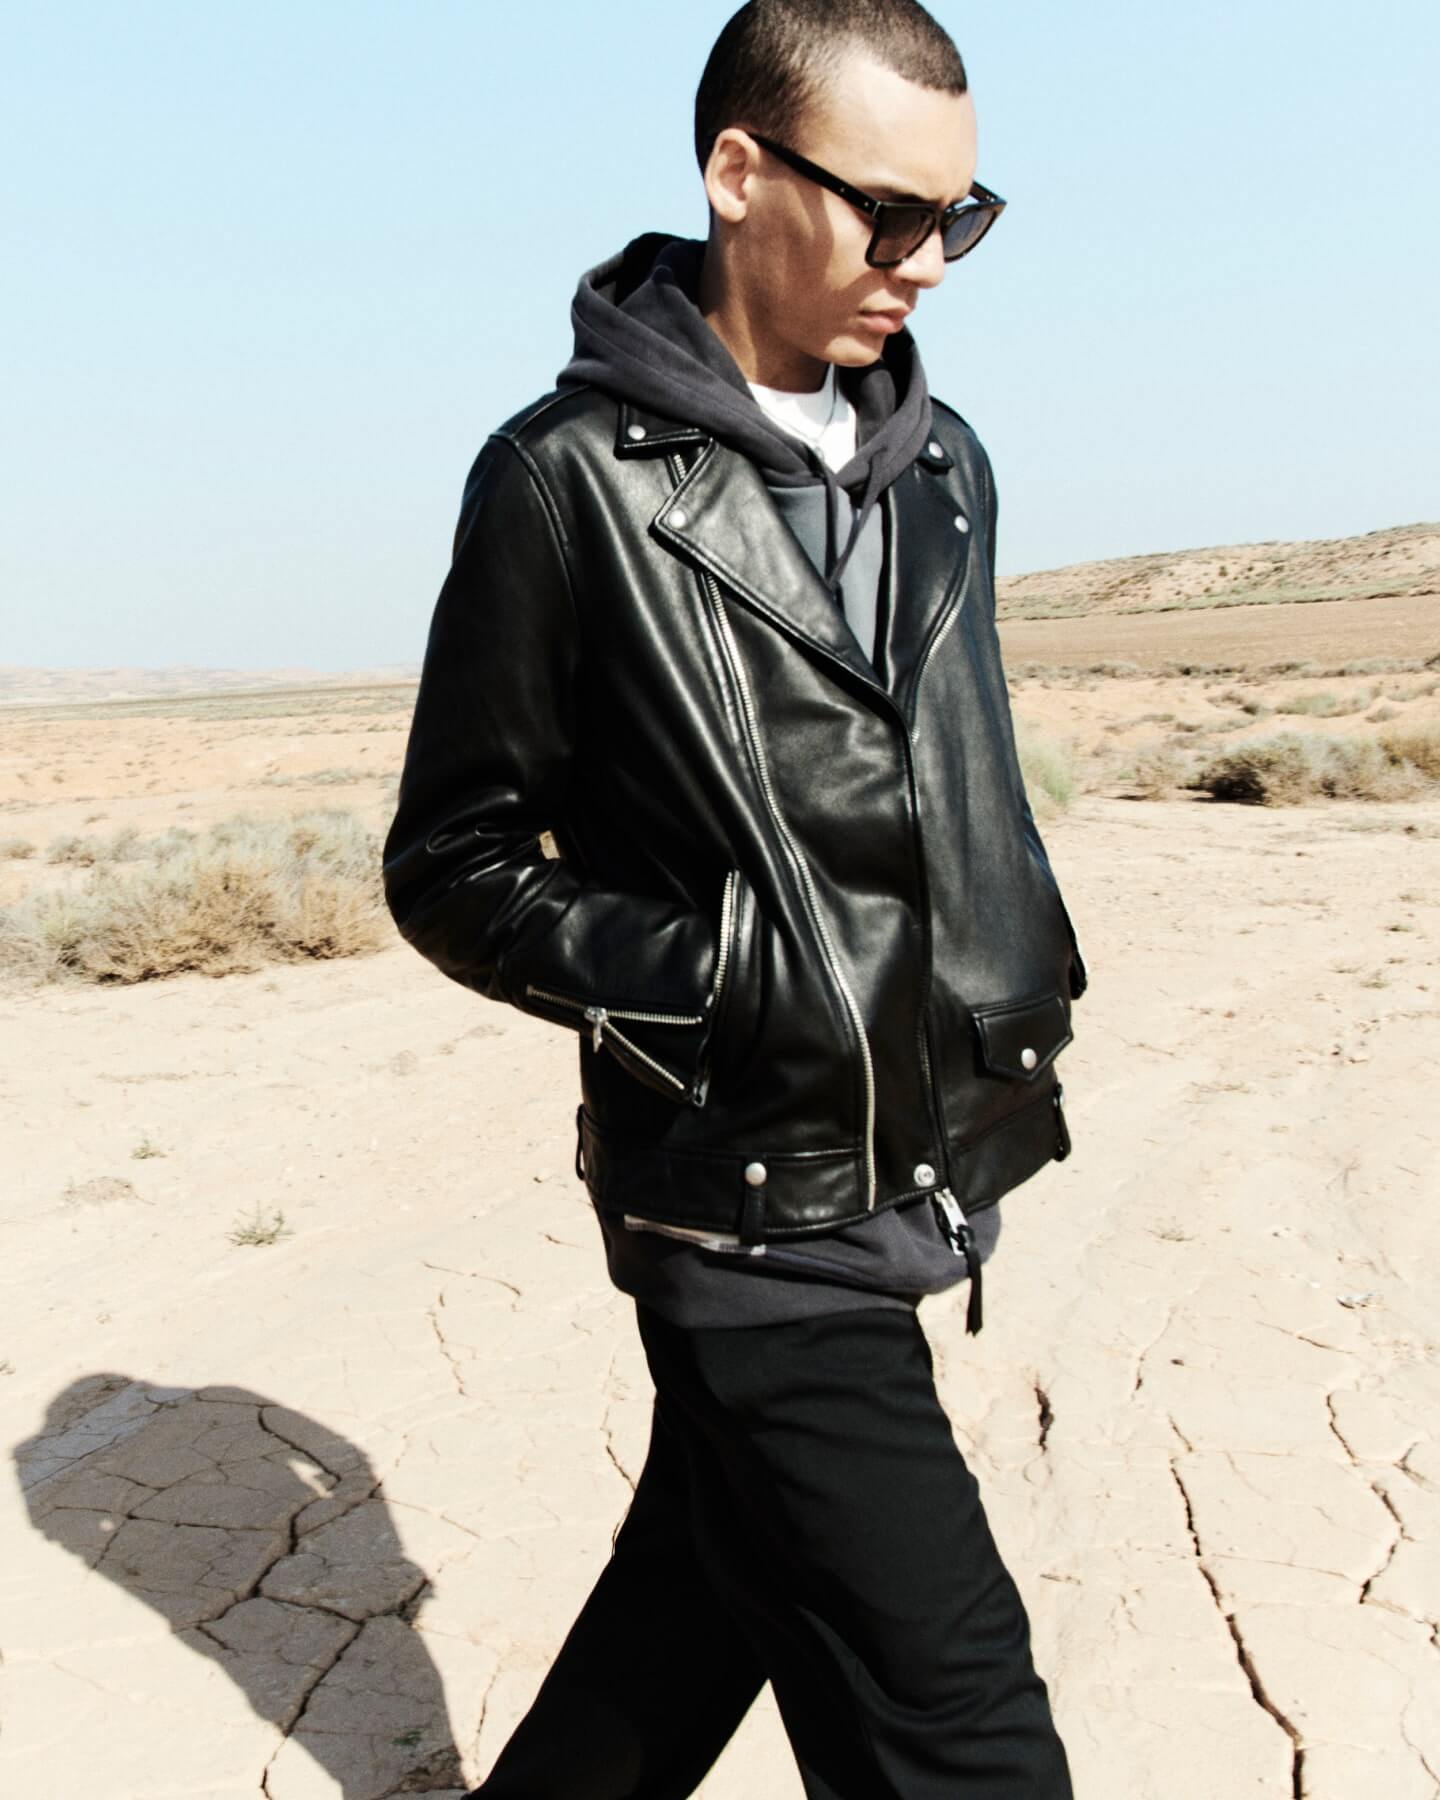 Man wearing a black leather jacket layered over a hoodie and black sunglasses walking in the desert.